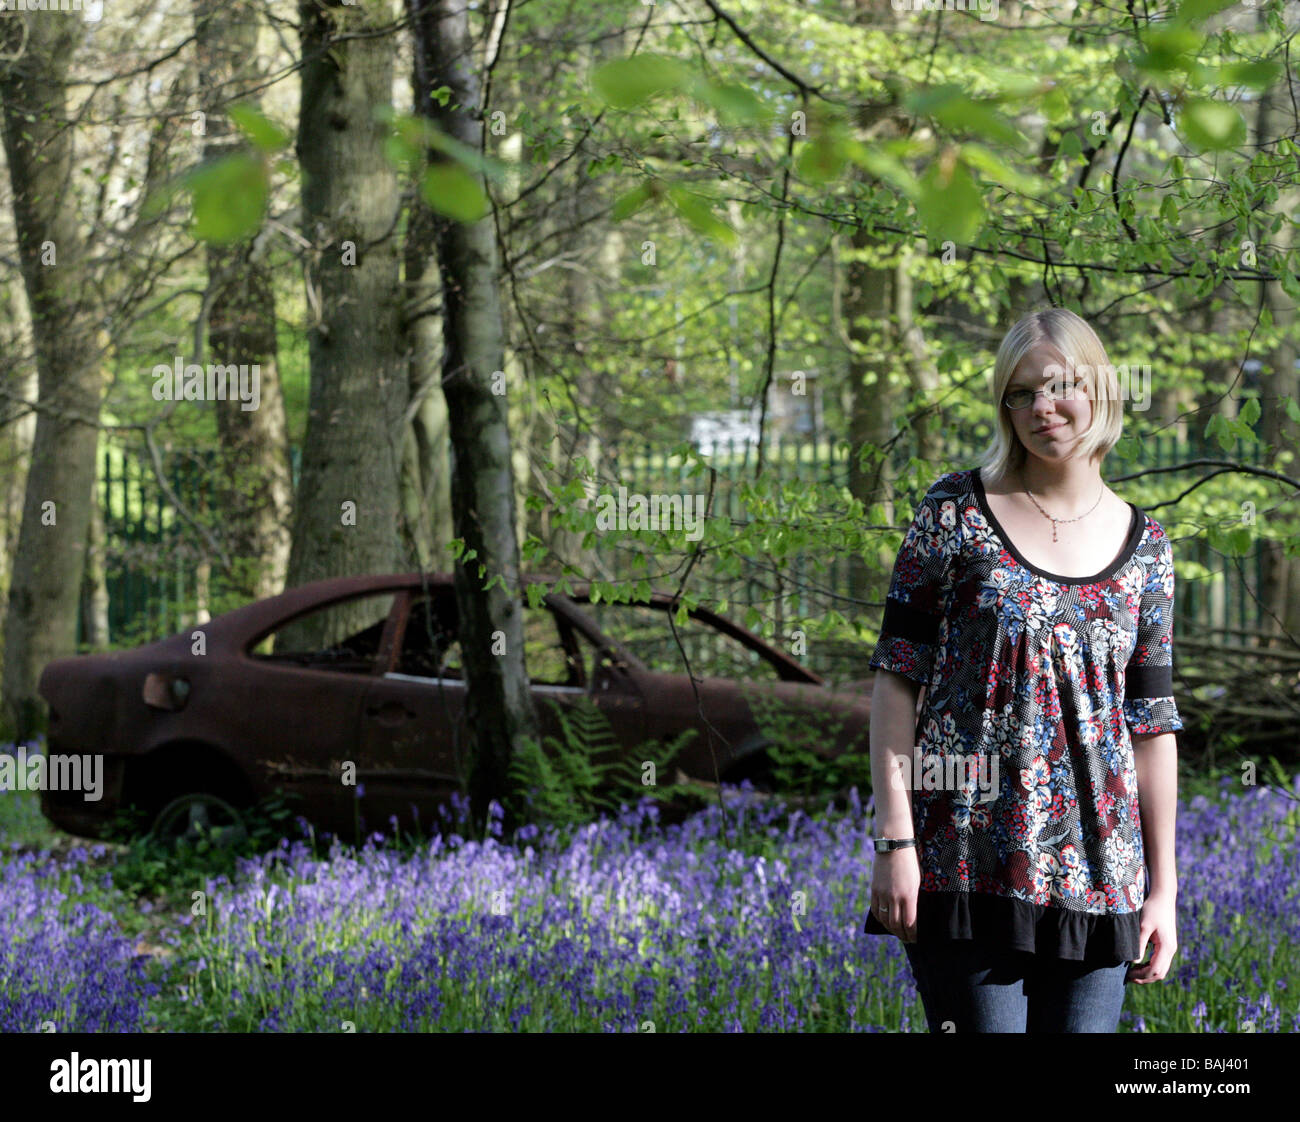 The peaceful environment surrounded by bluebells on Ranmore Common is ruined by a dumped car Stock Photo